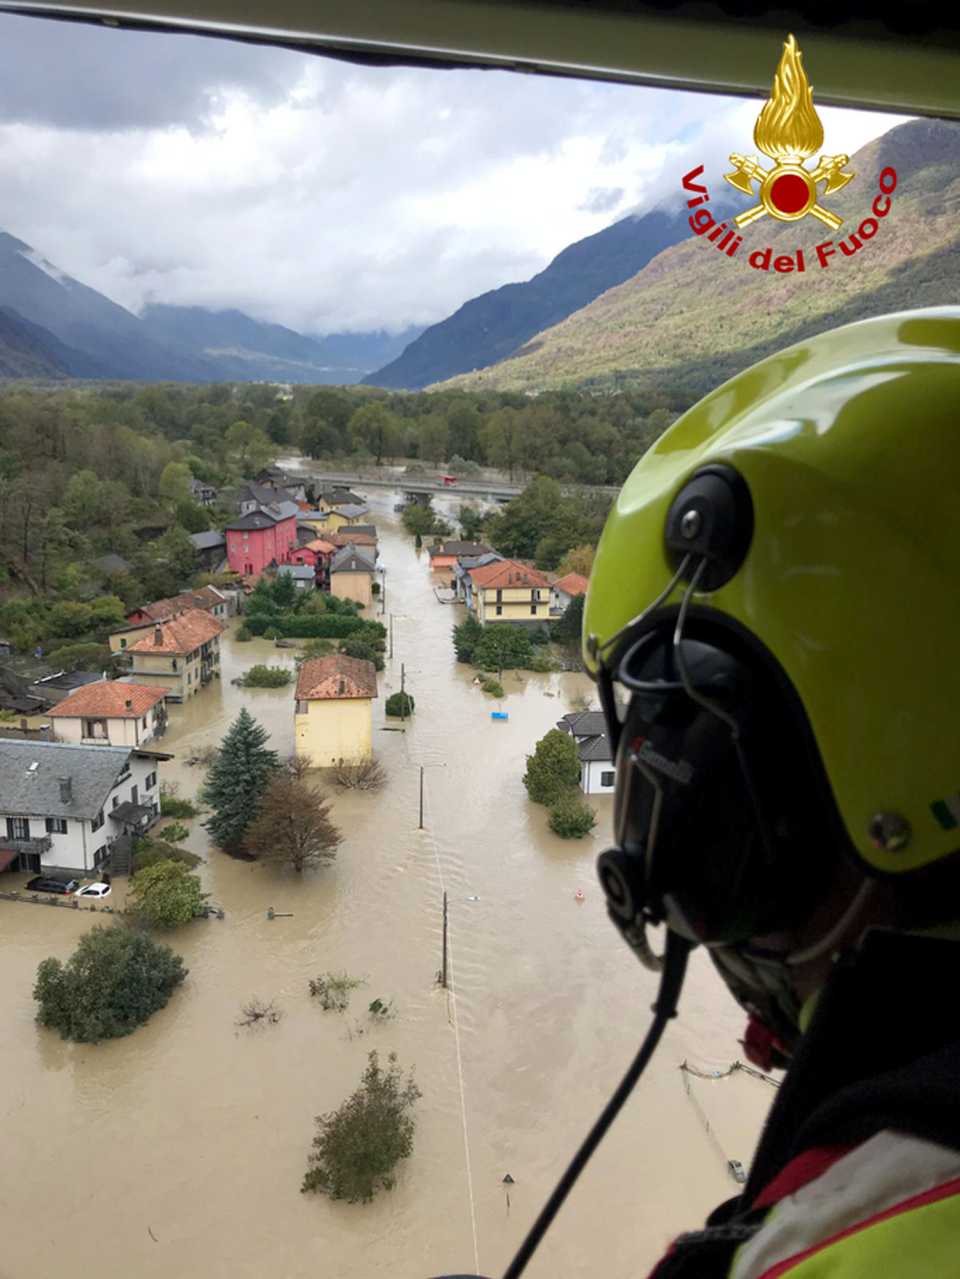 In this image made available Sunday, Oct. 4, 2020, firefighters fly over flooding in the town of Ornavasso, in the northern Italian region of Piedmont. (Firefighter Vigili del Fuoco via AP)